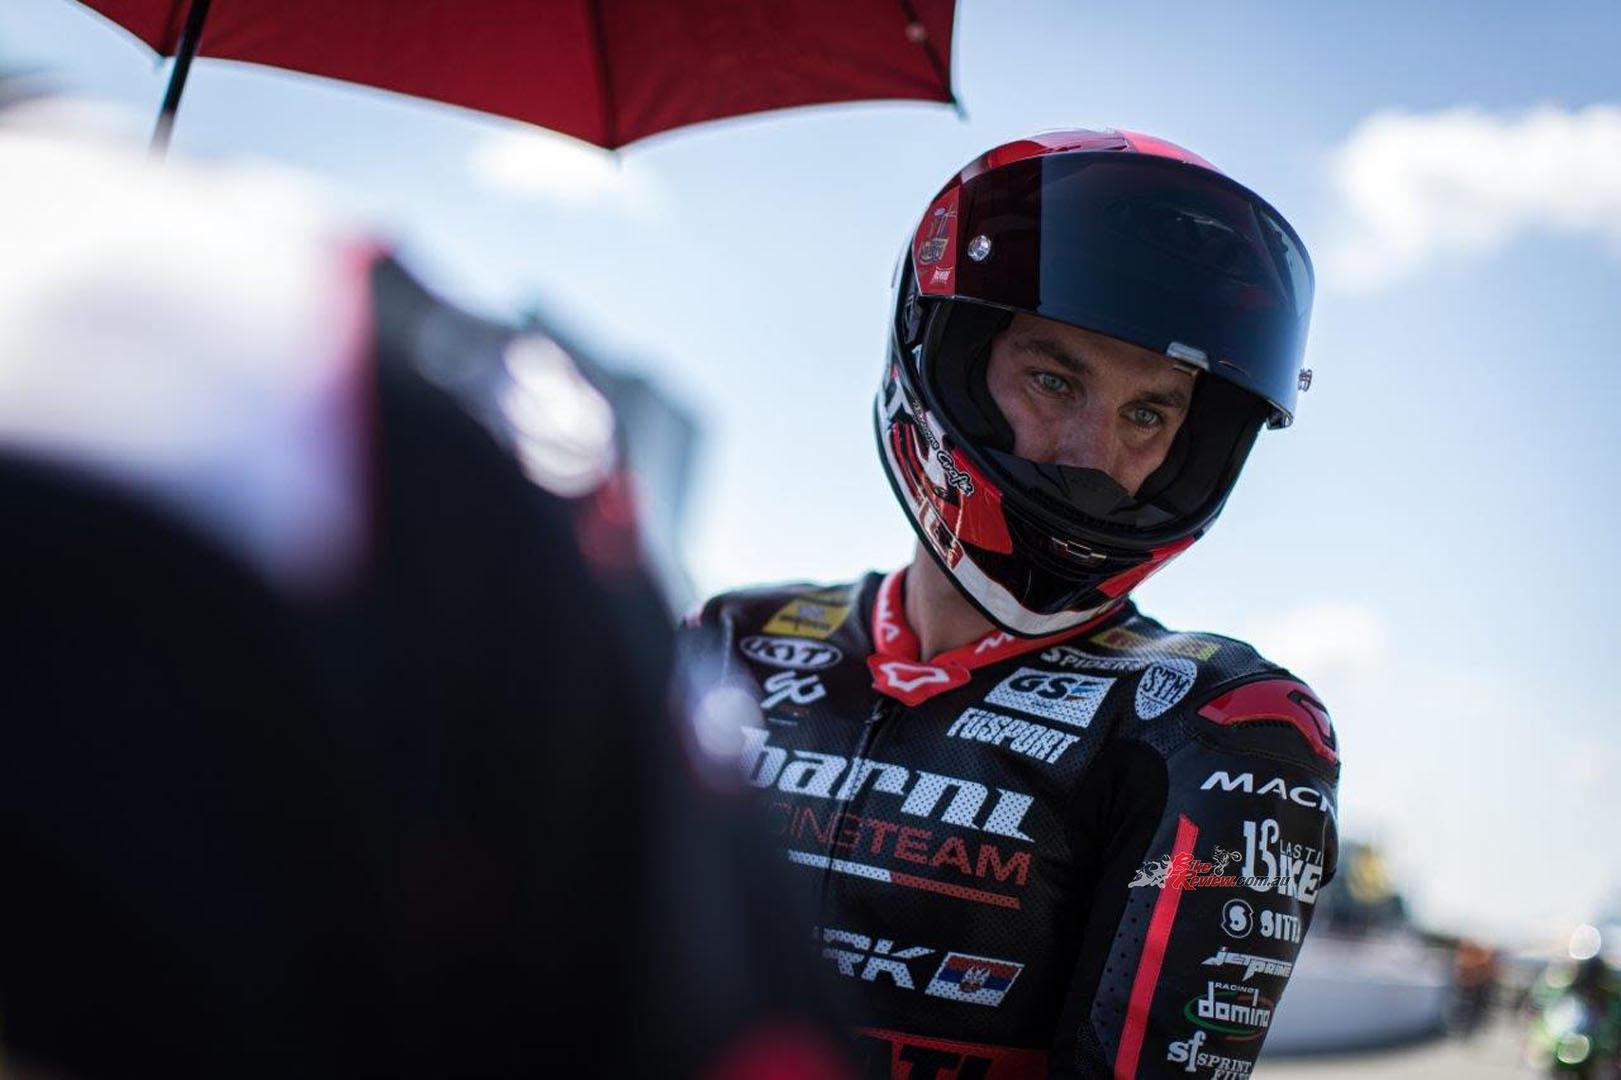 Oli Bayliss' debut effort in the World Supersport class couldn't have gotten off to a worse start when he broke his right ankle in preseason testing.